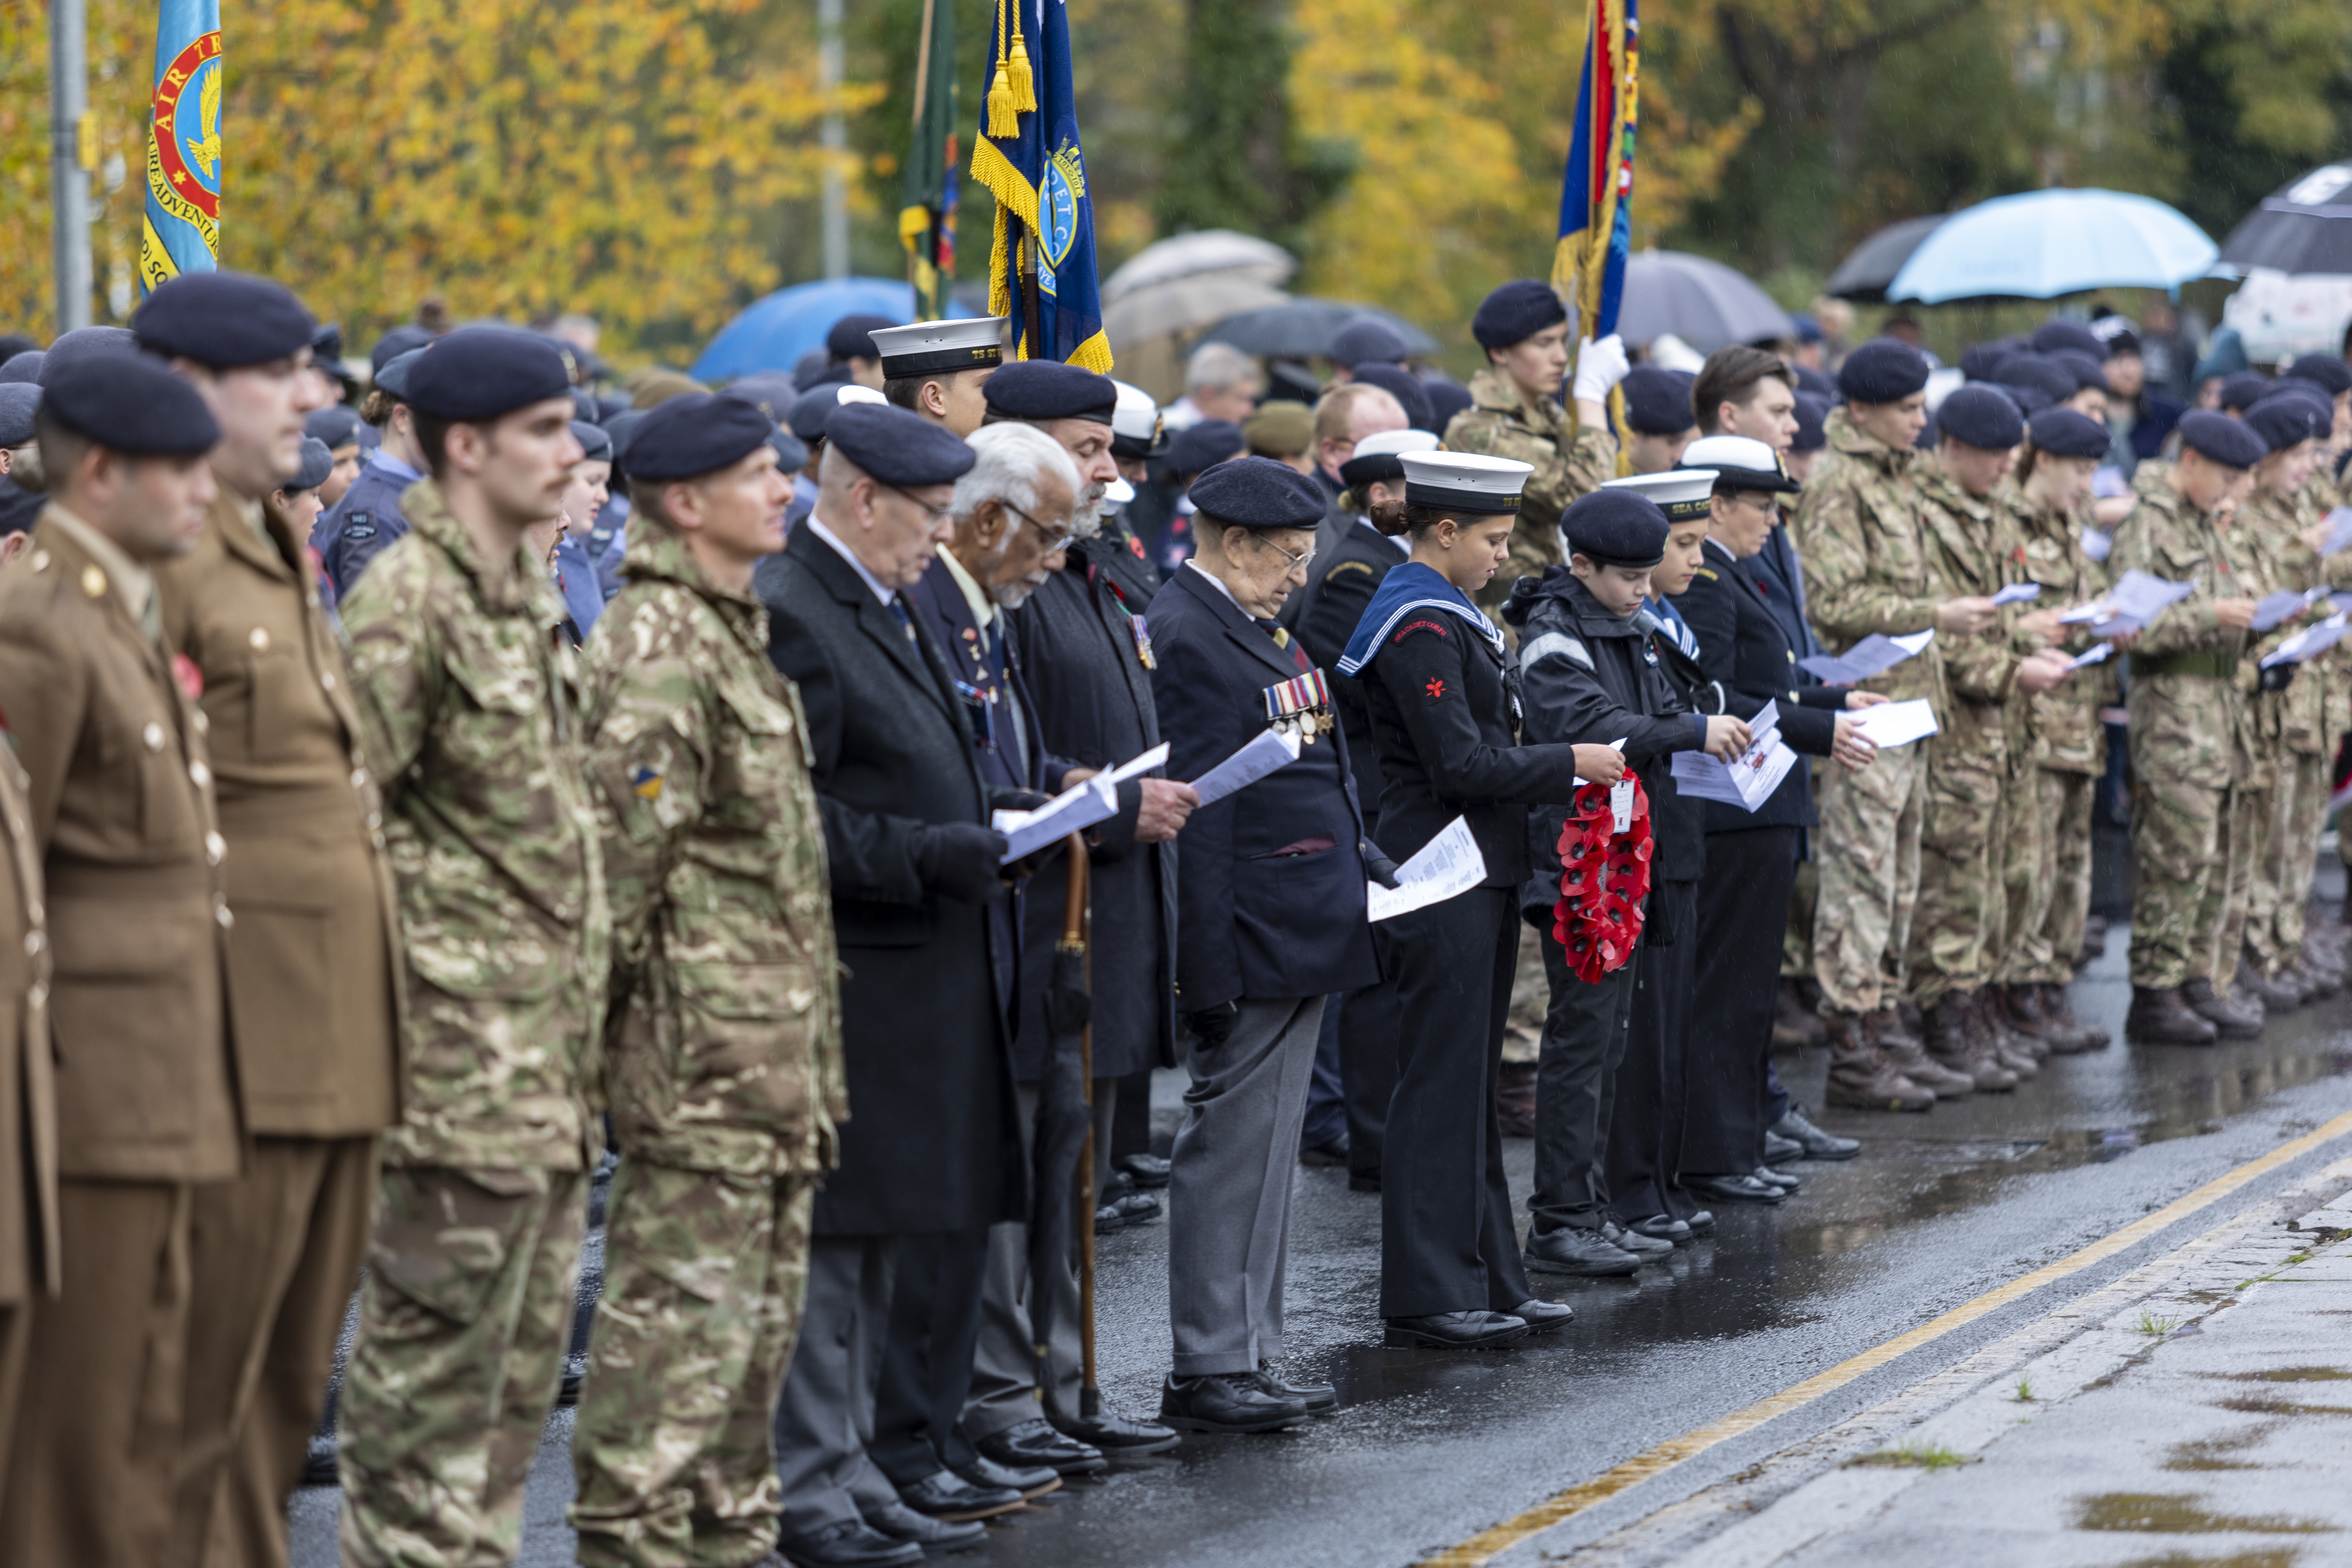 Members of the Armed Forces of past, present and future at the Brentwood Remembrance Day Parade